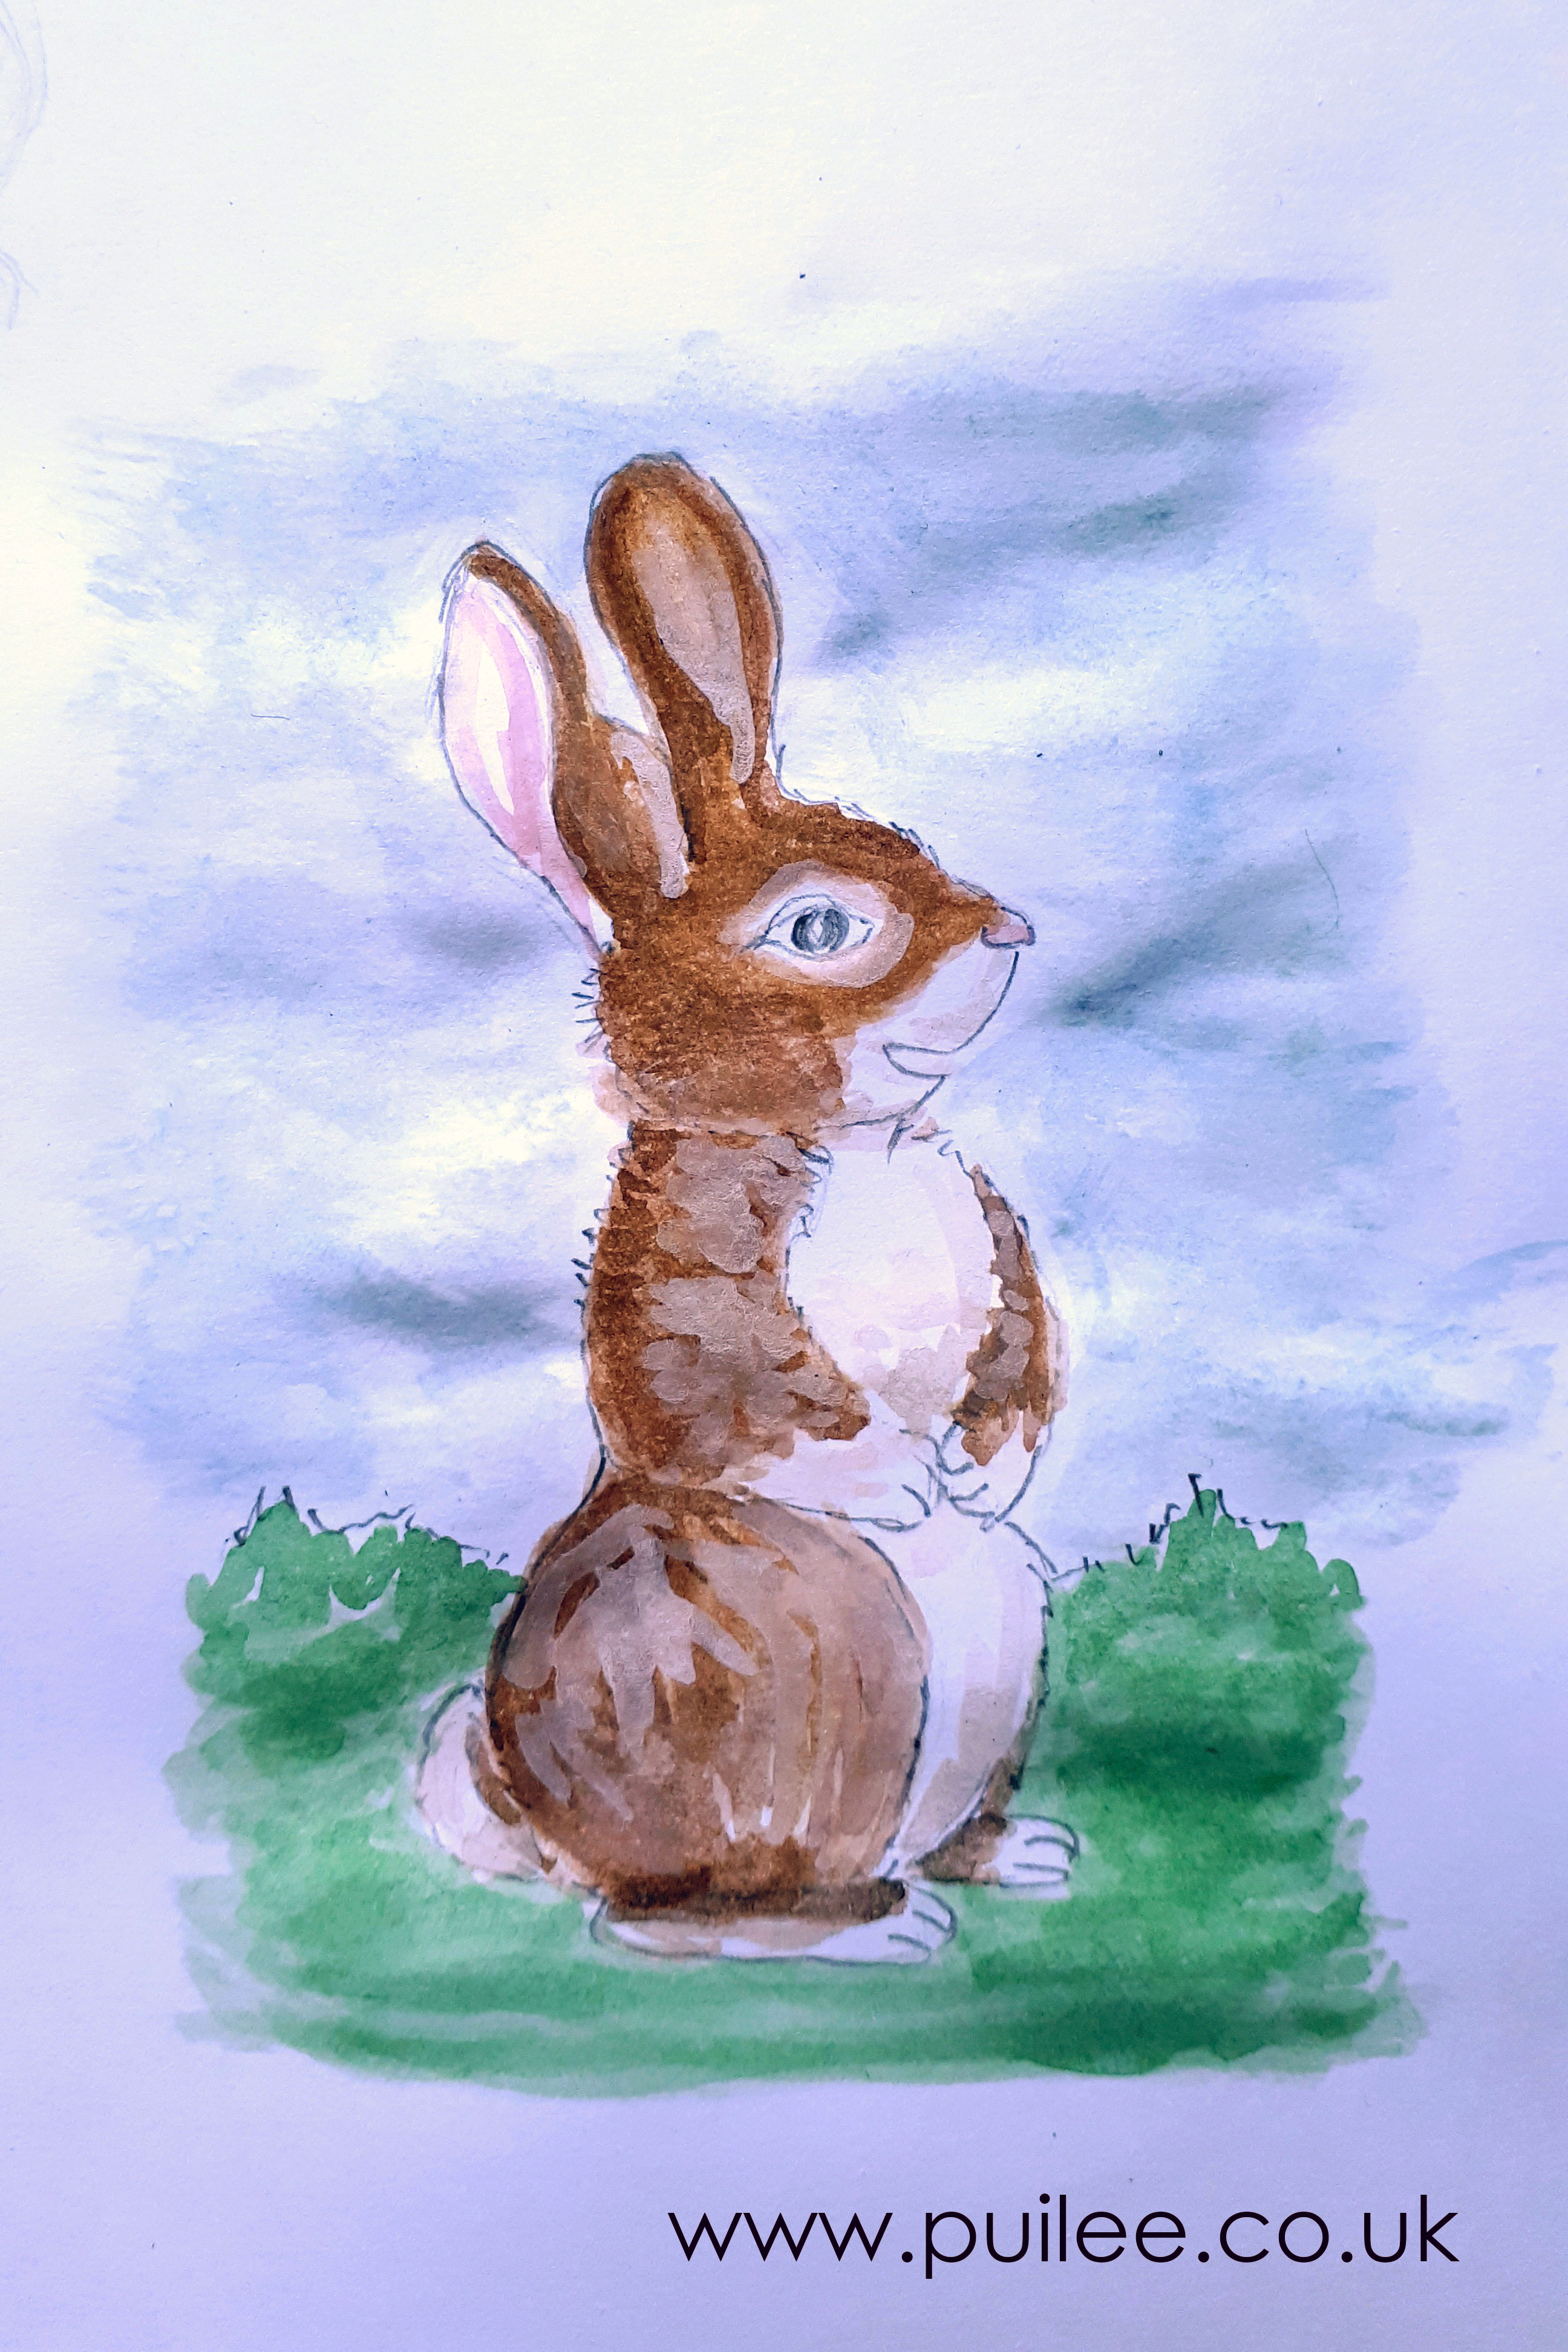 Bunny (2020) pencil and watercolour on paper - Artist Pui Lee